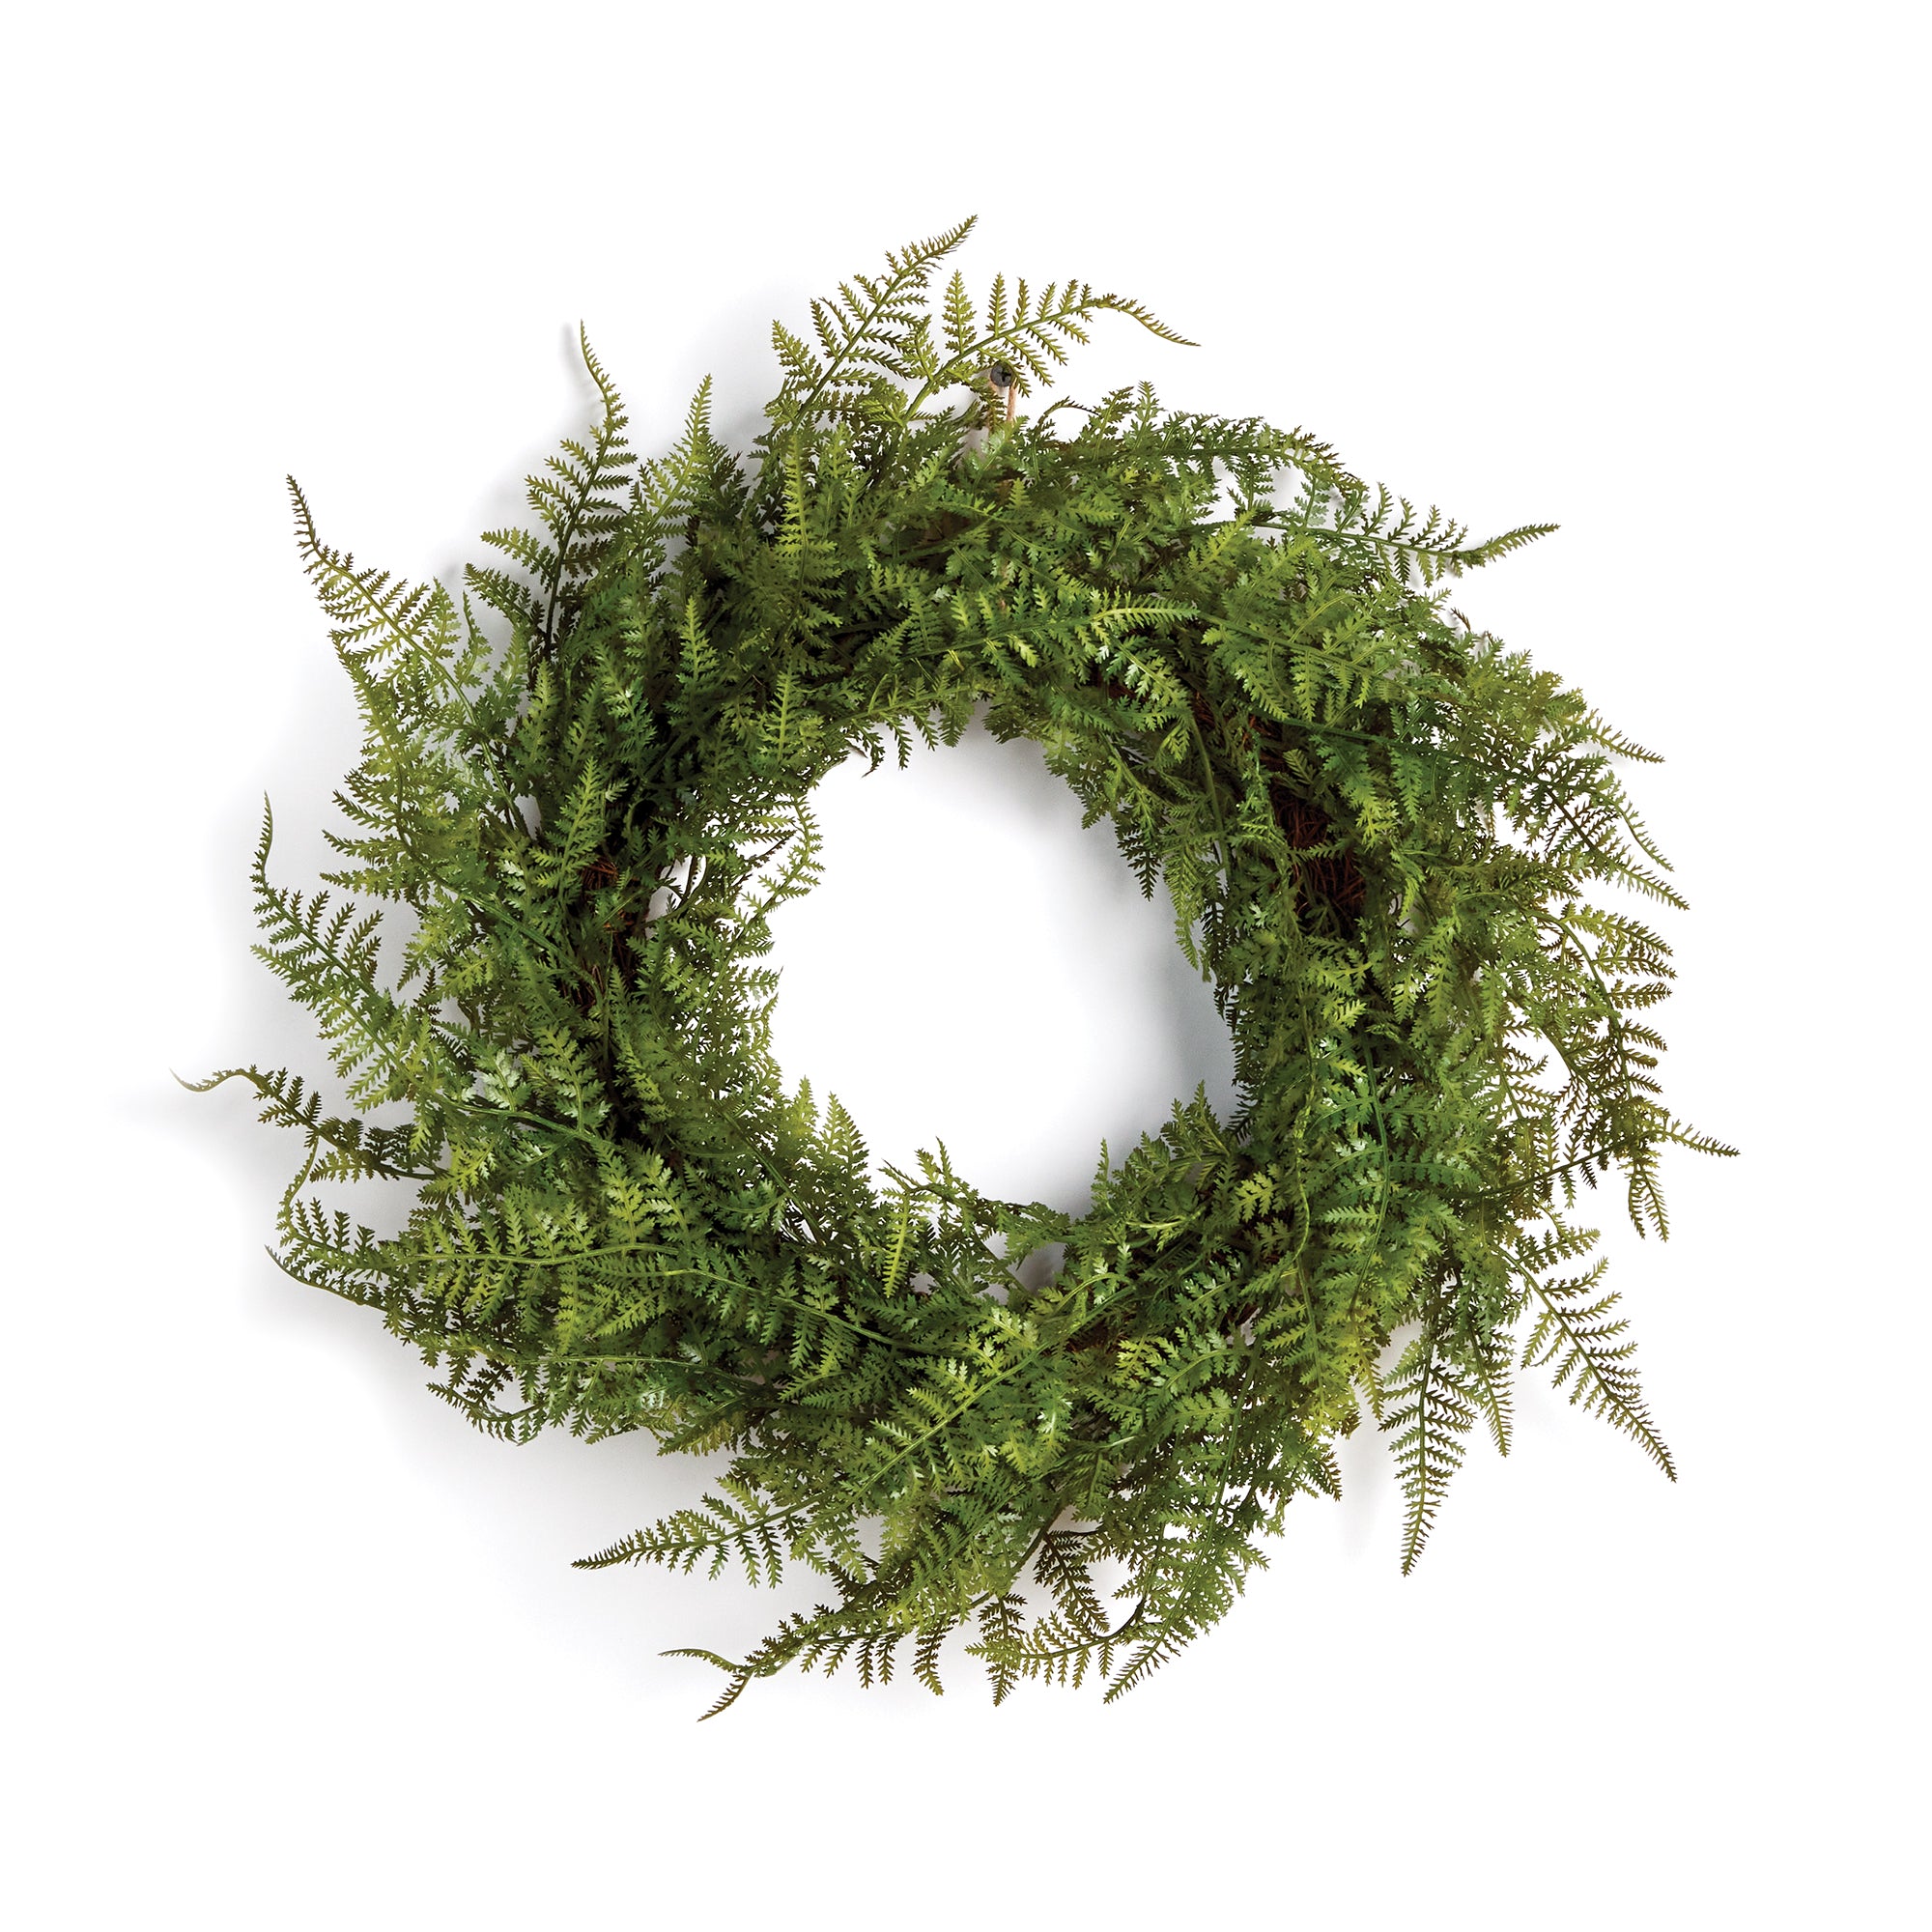 This fern wreath is full and lush. Soft faux fern stems assembled and generously applied, and comes with a twine loop for hanging. Simply beautiful on its own, or a great base to add additional floral stems or eucalyptus leaves, for more variety. Amethyst Home provides interior design, new construction, custom furniture, and area rugs in the Alpharetta metro area.